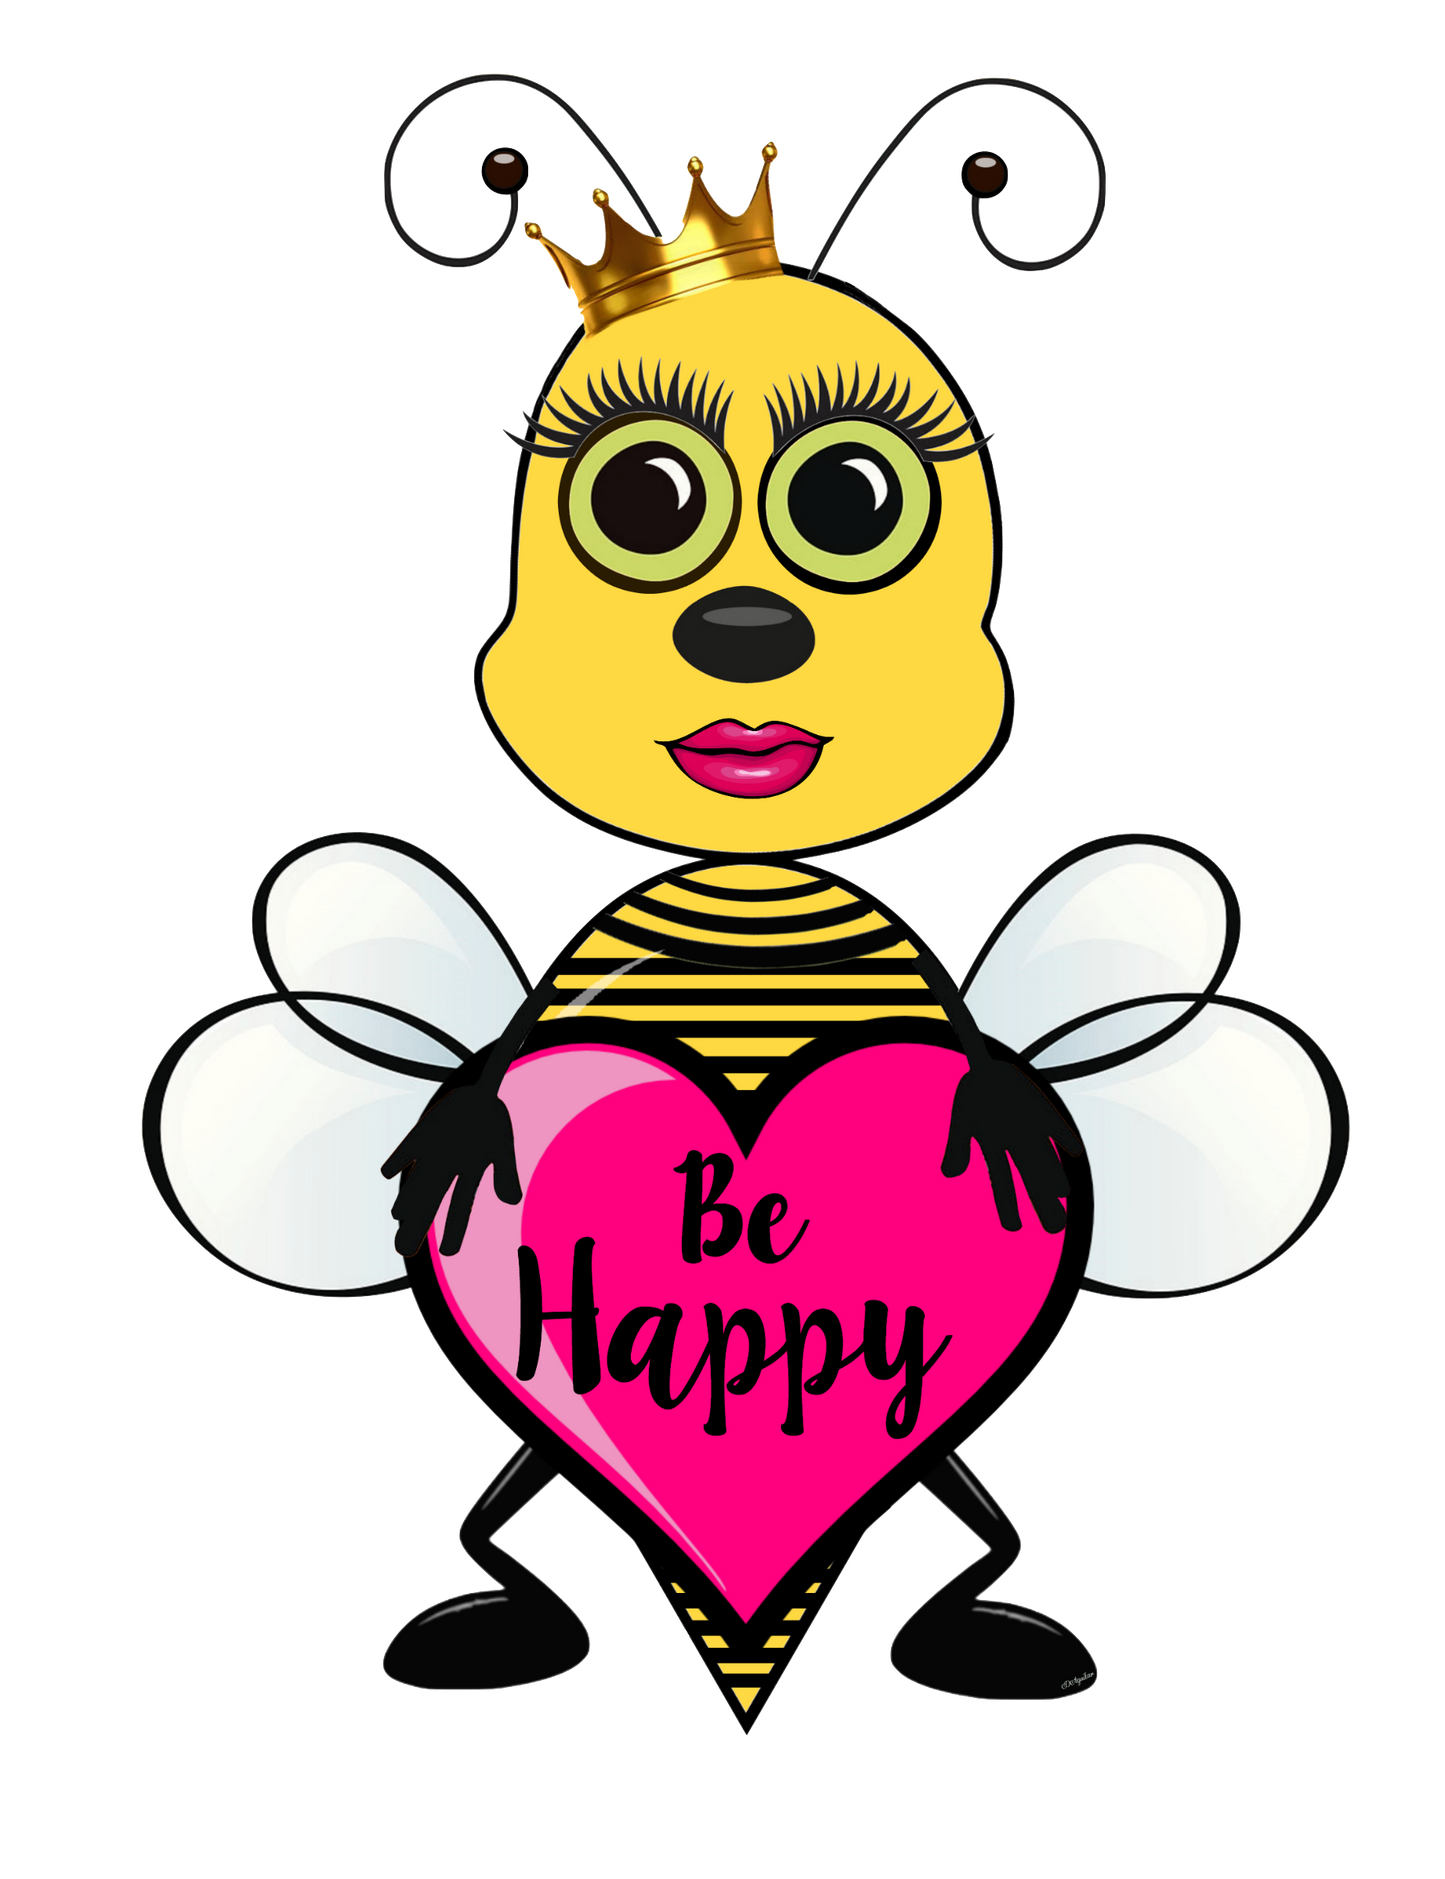 Be Happy - Cute Bee holding heart sign